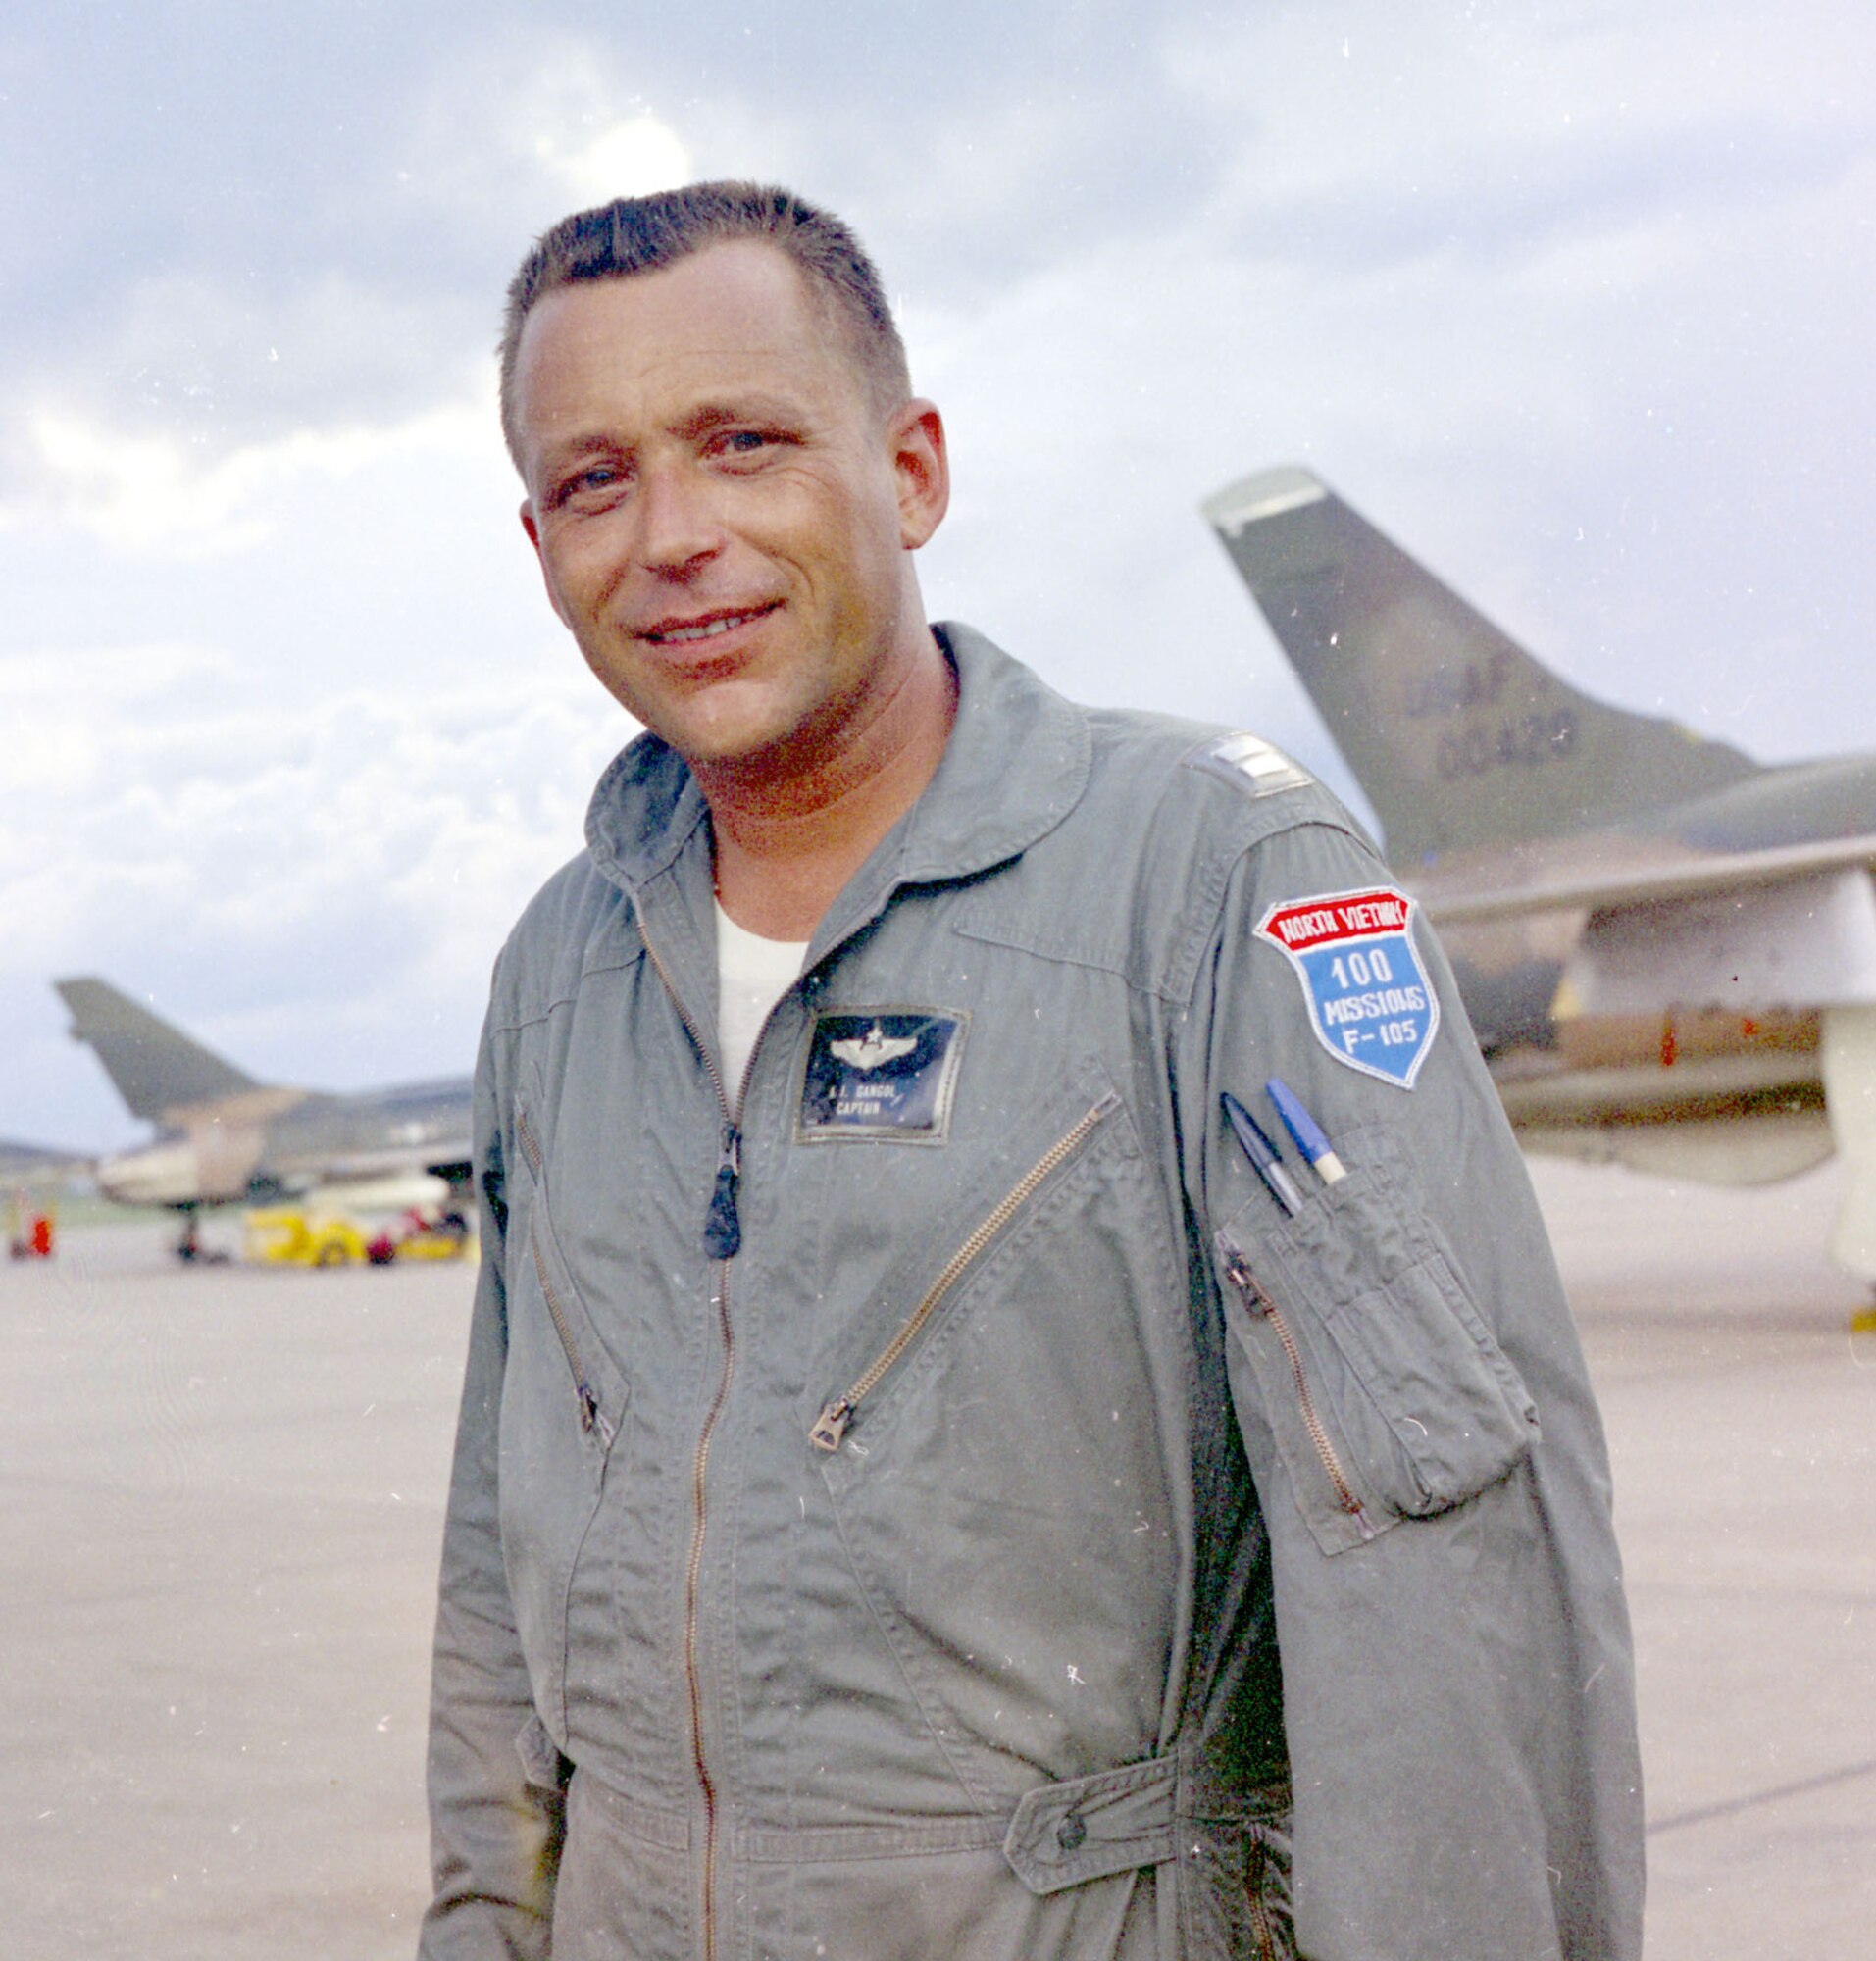 Capt. Gangol pictured after finishing his 100-mission tour. (U.S. Air Force photo)